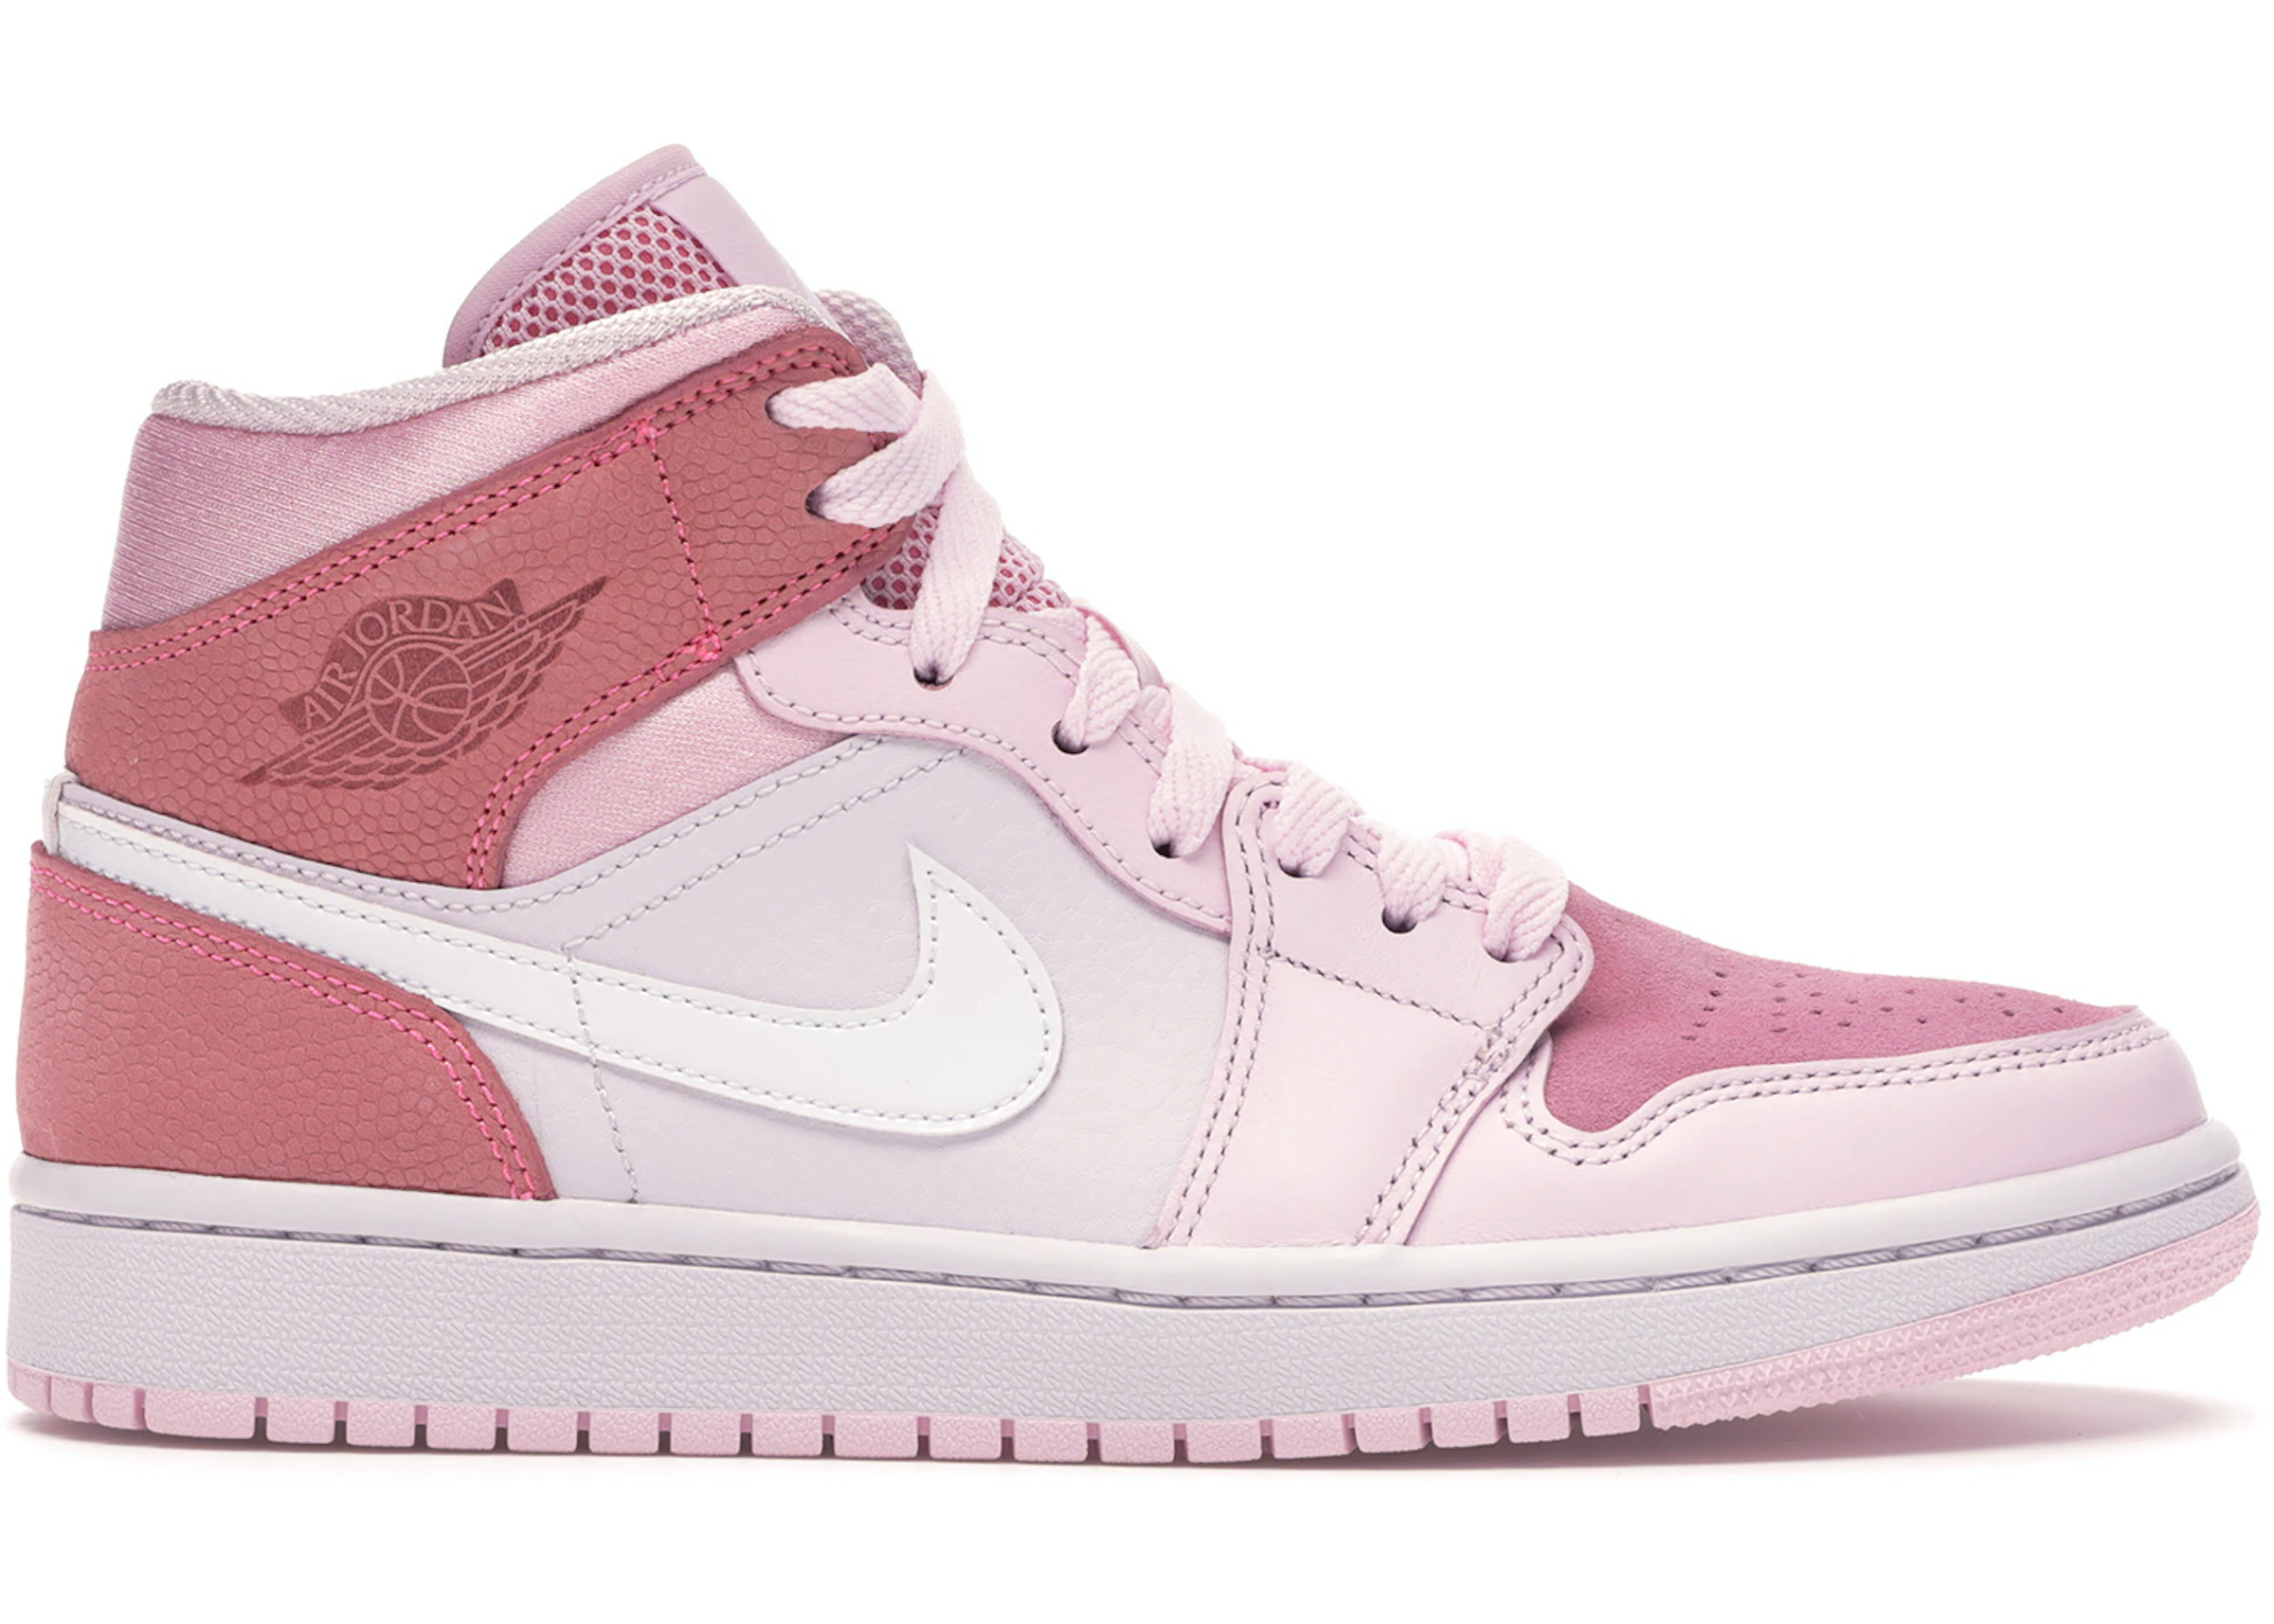 Susceptible to Darts Shopping Centre Jordan 1 Mid Digital Pink (W) - CW5379-600 - US